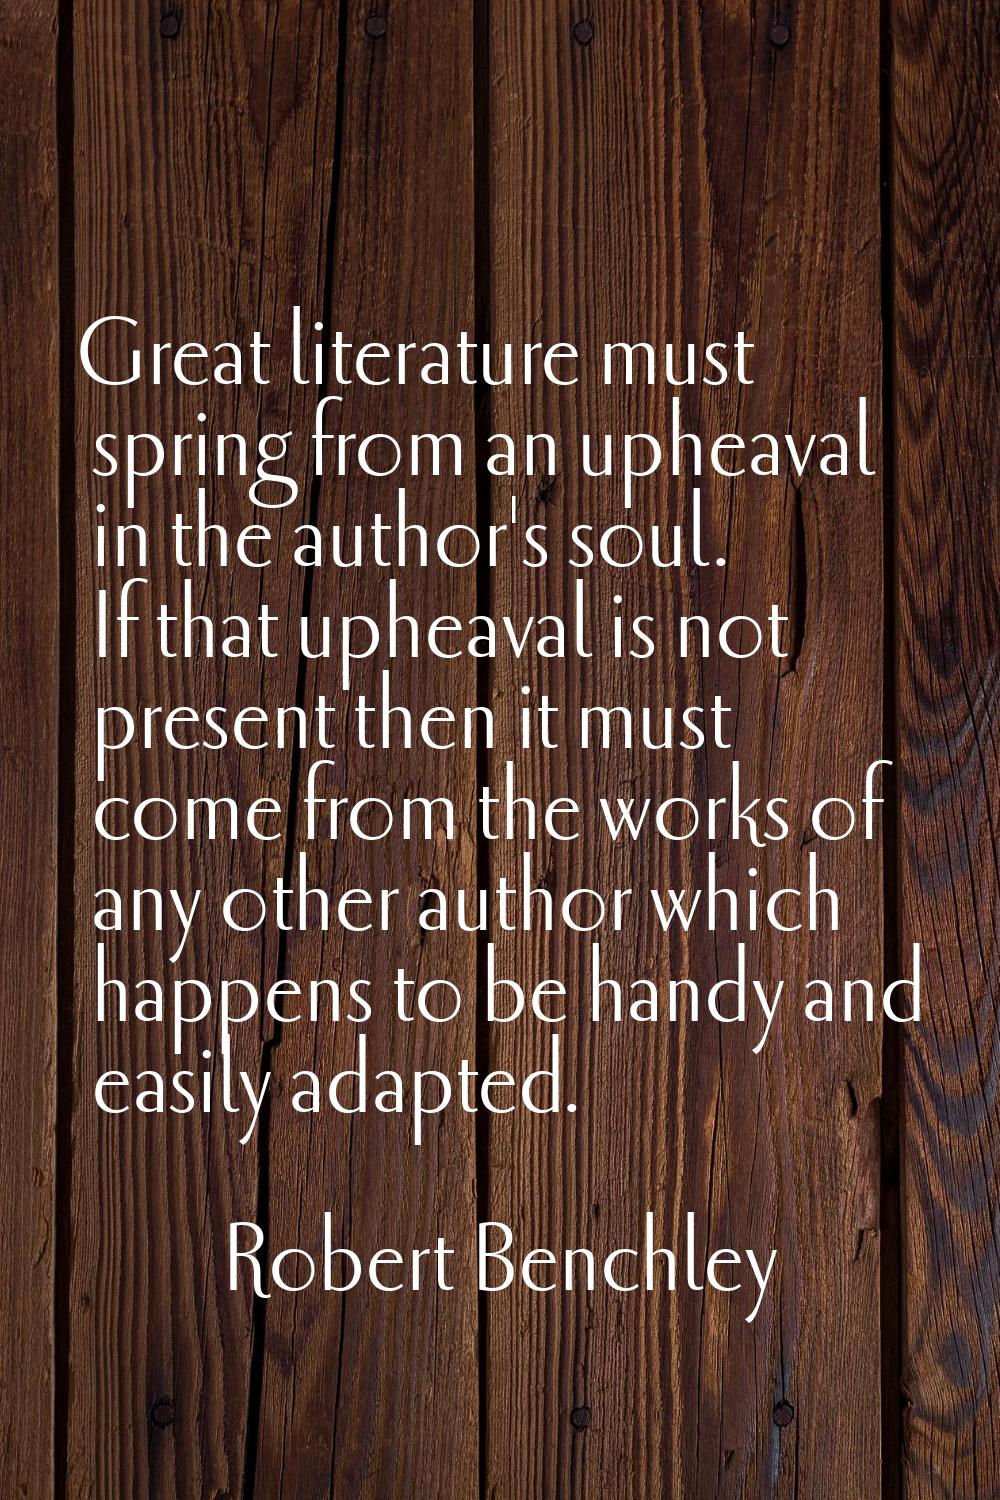 Great literature must spring from an upheaval in the author's soul. If that upheaval is not present